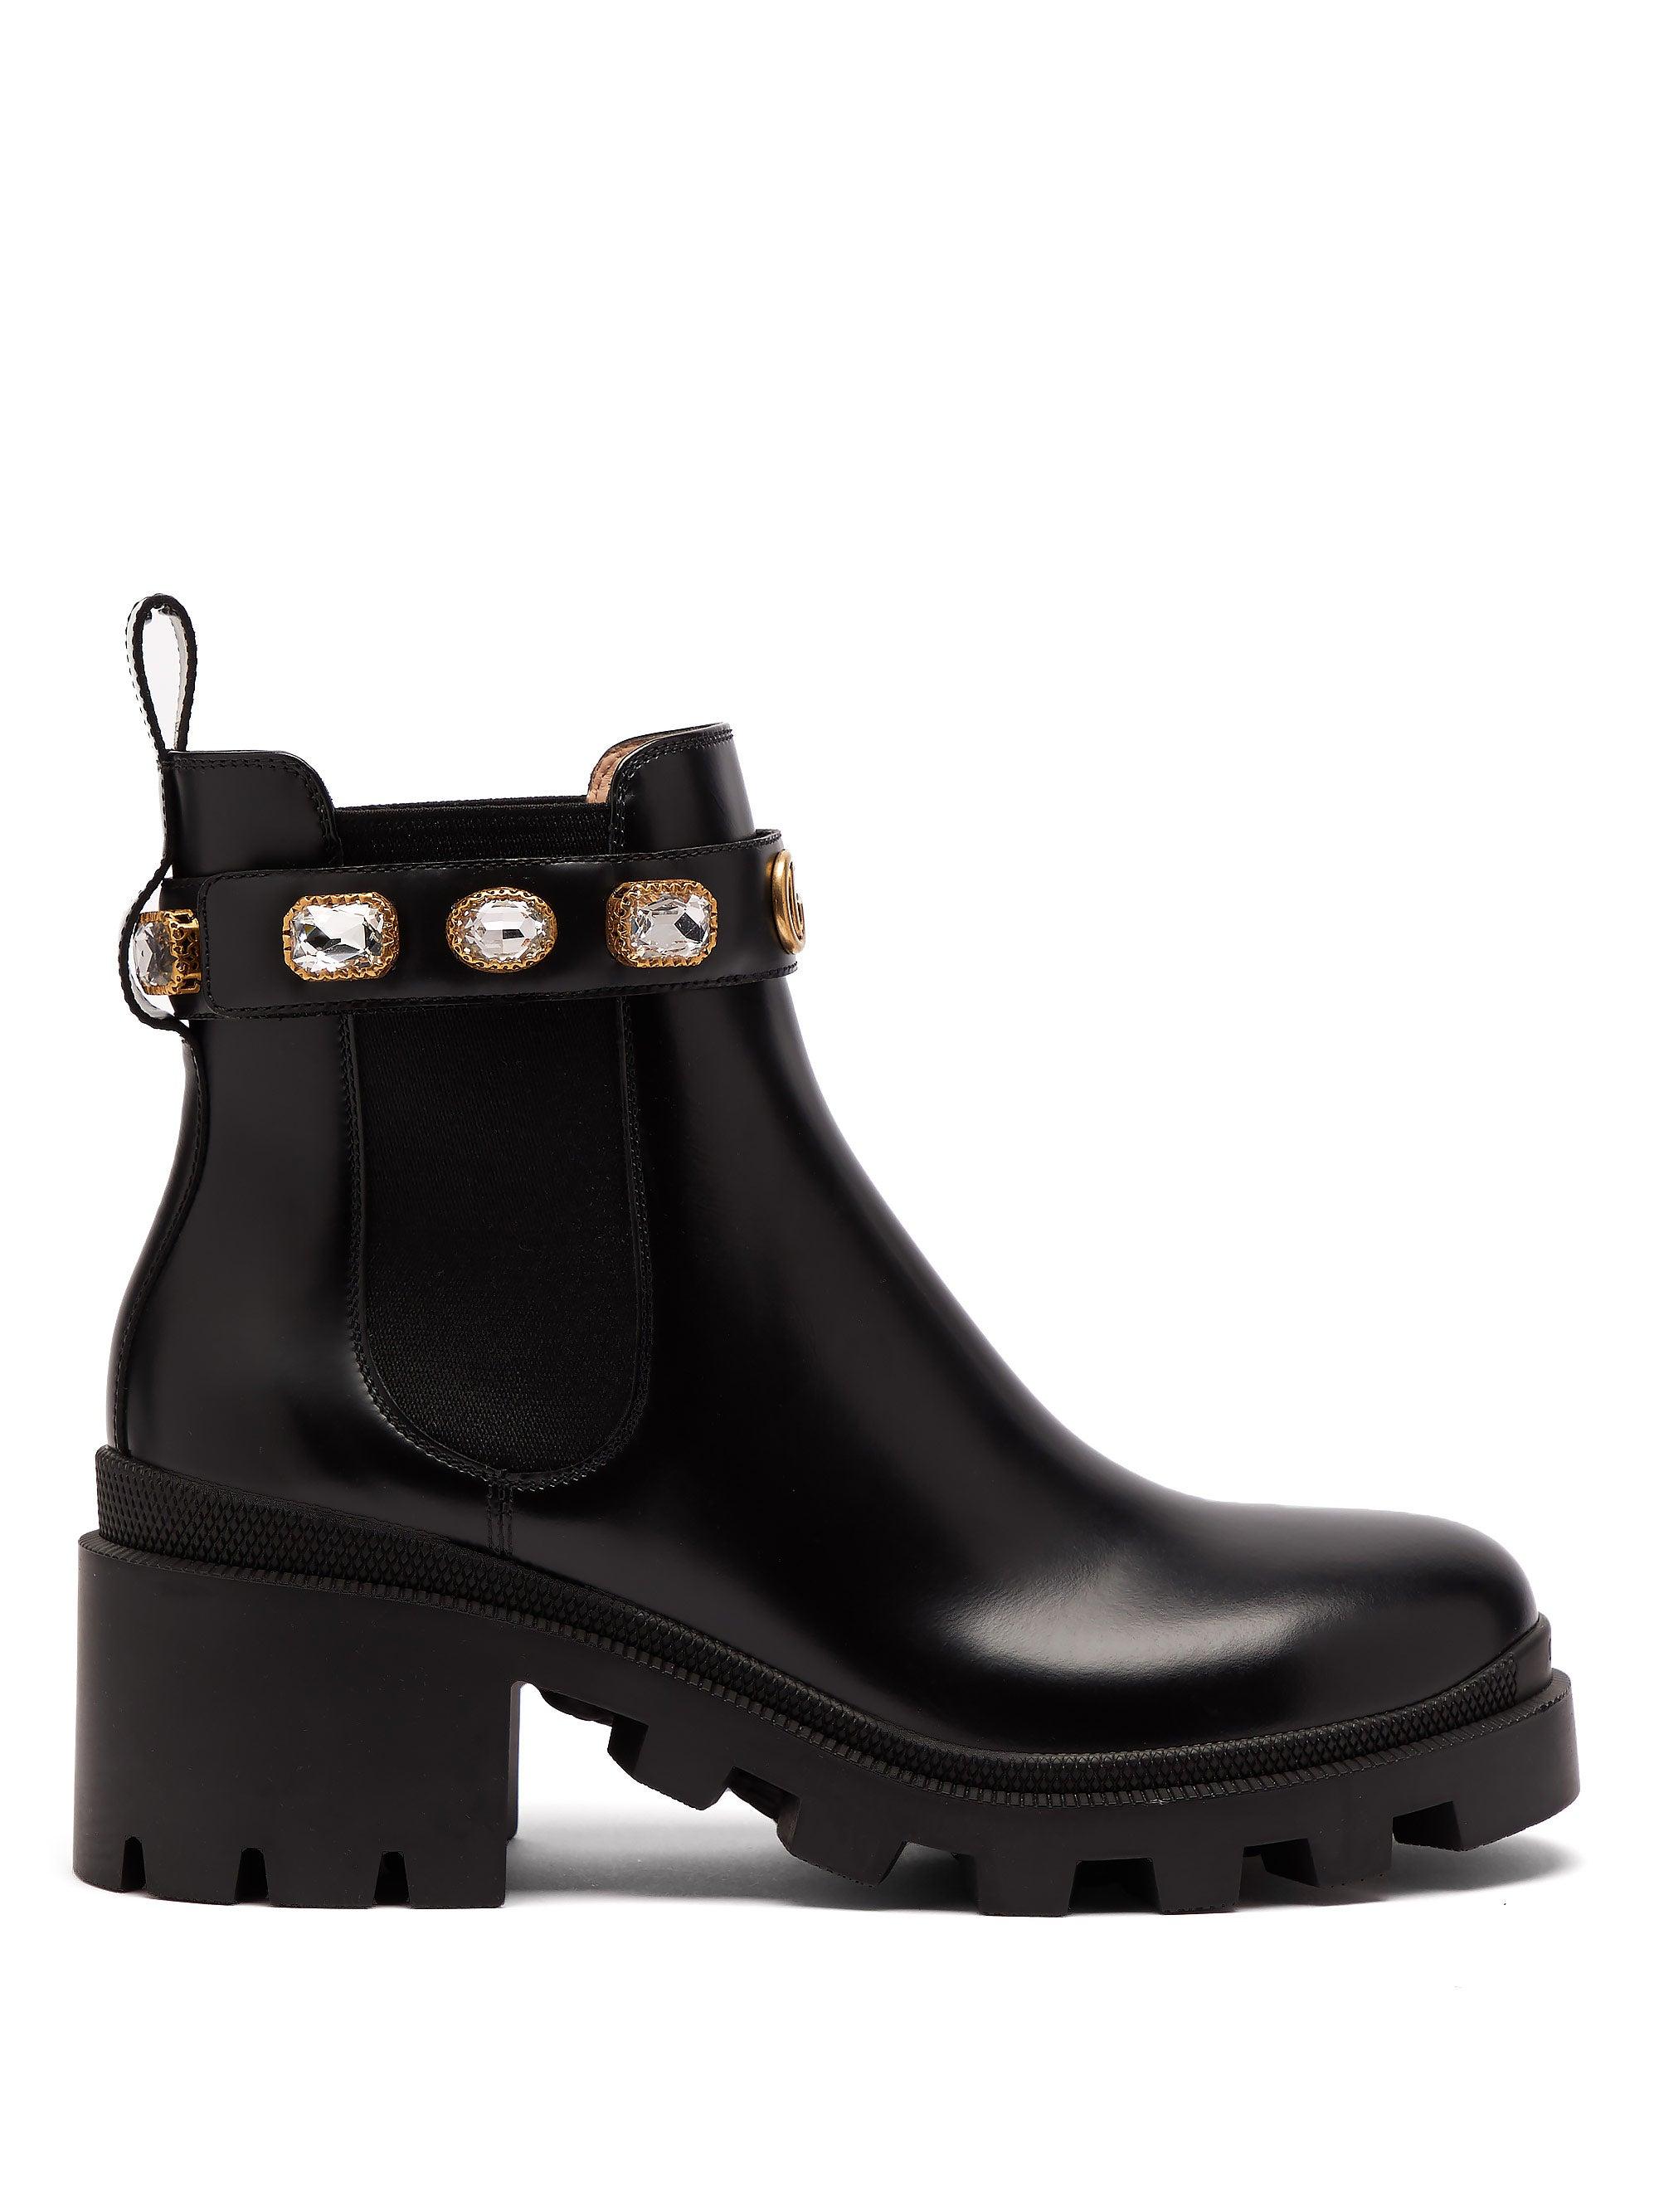 Gucci Leather Ankle Boot With Belt in Black - Save 64% - Lyst